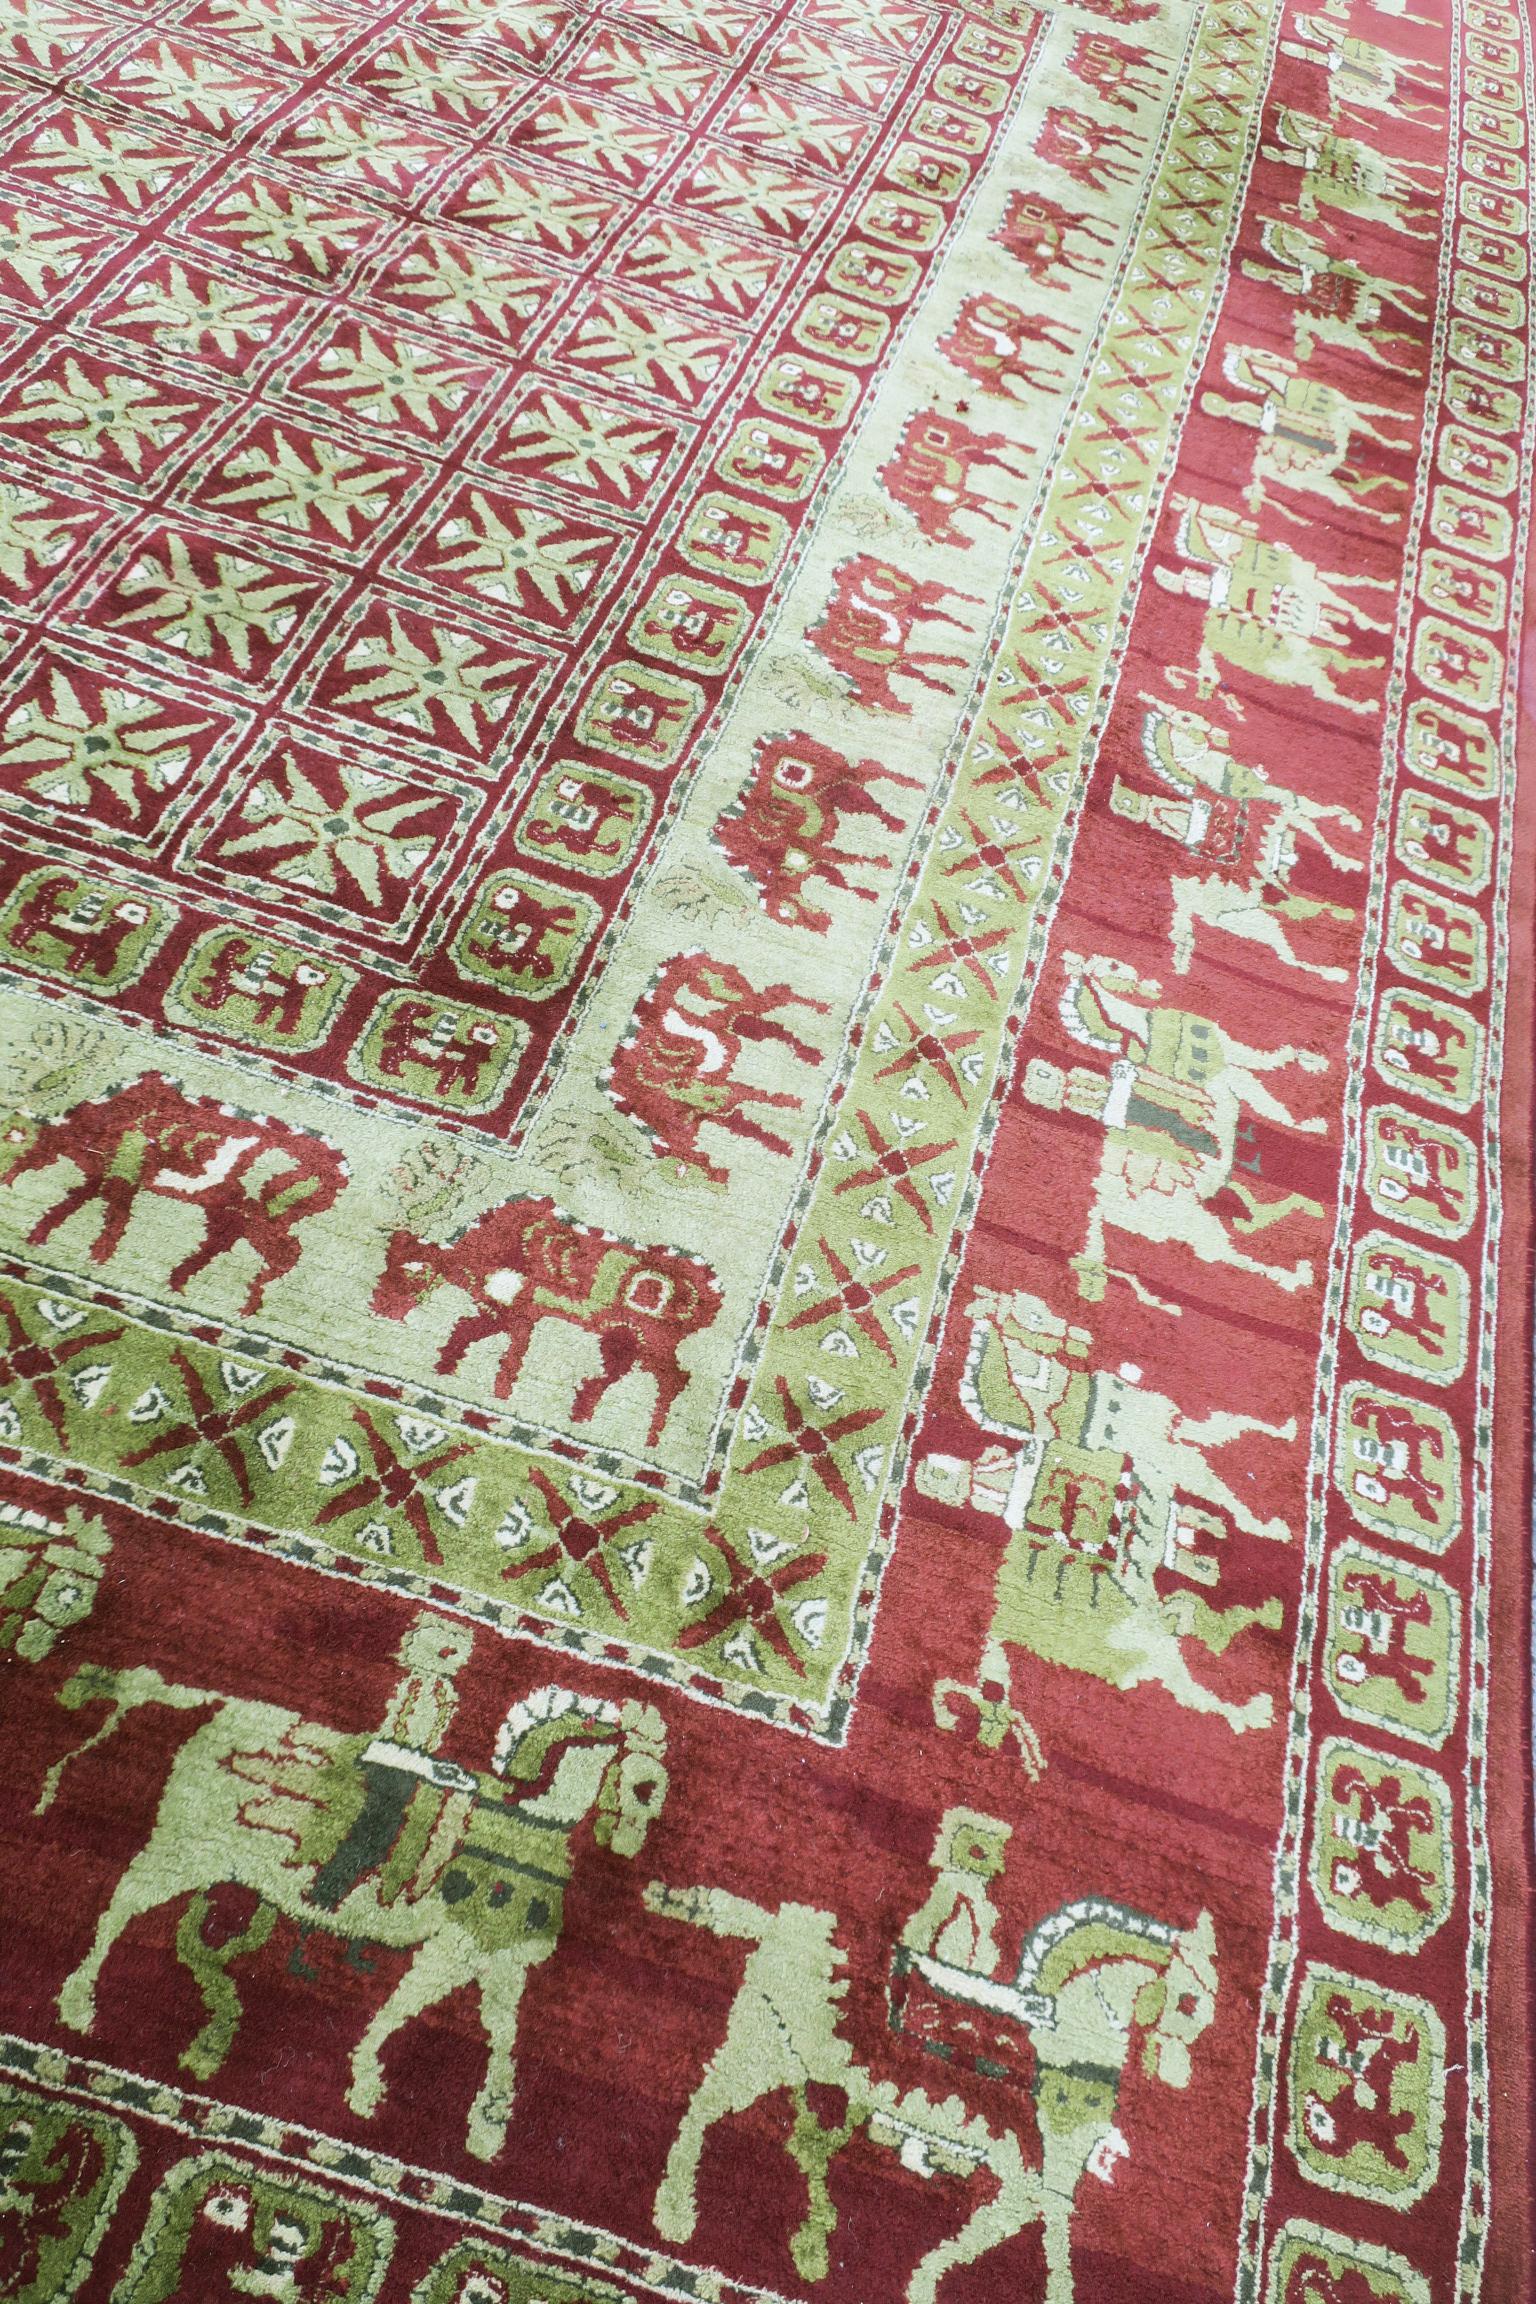 oldest carpet in the world